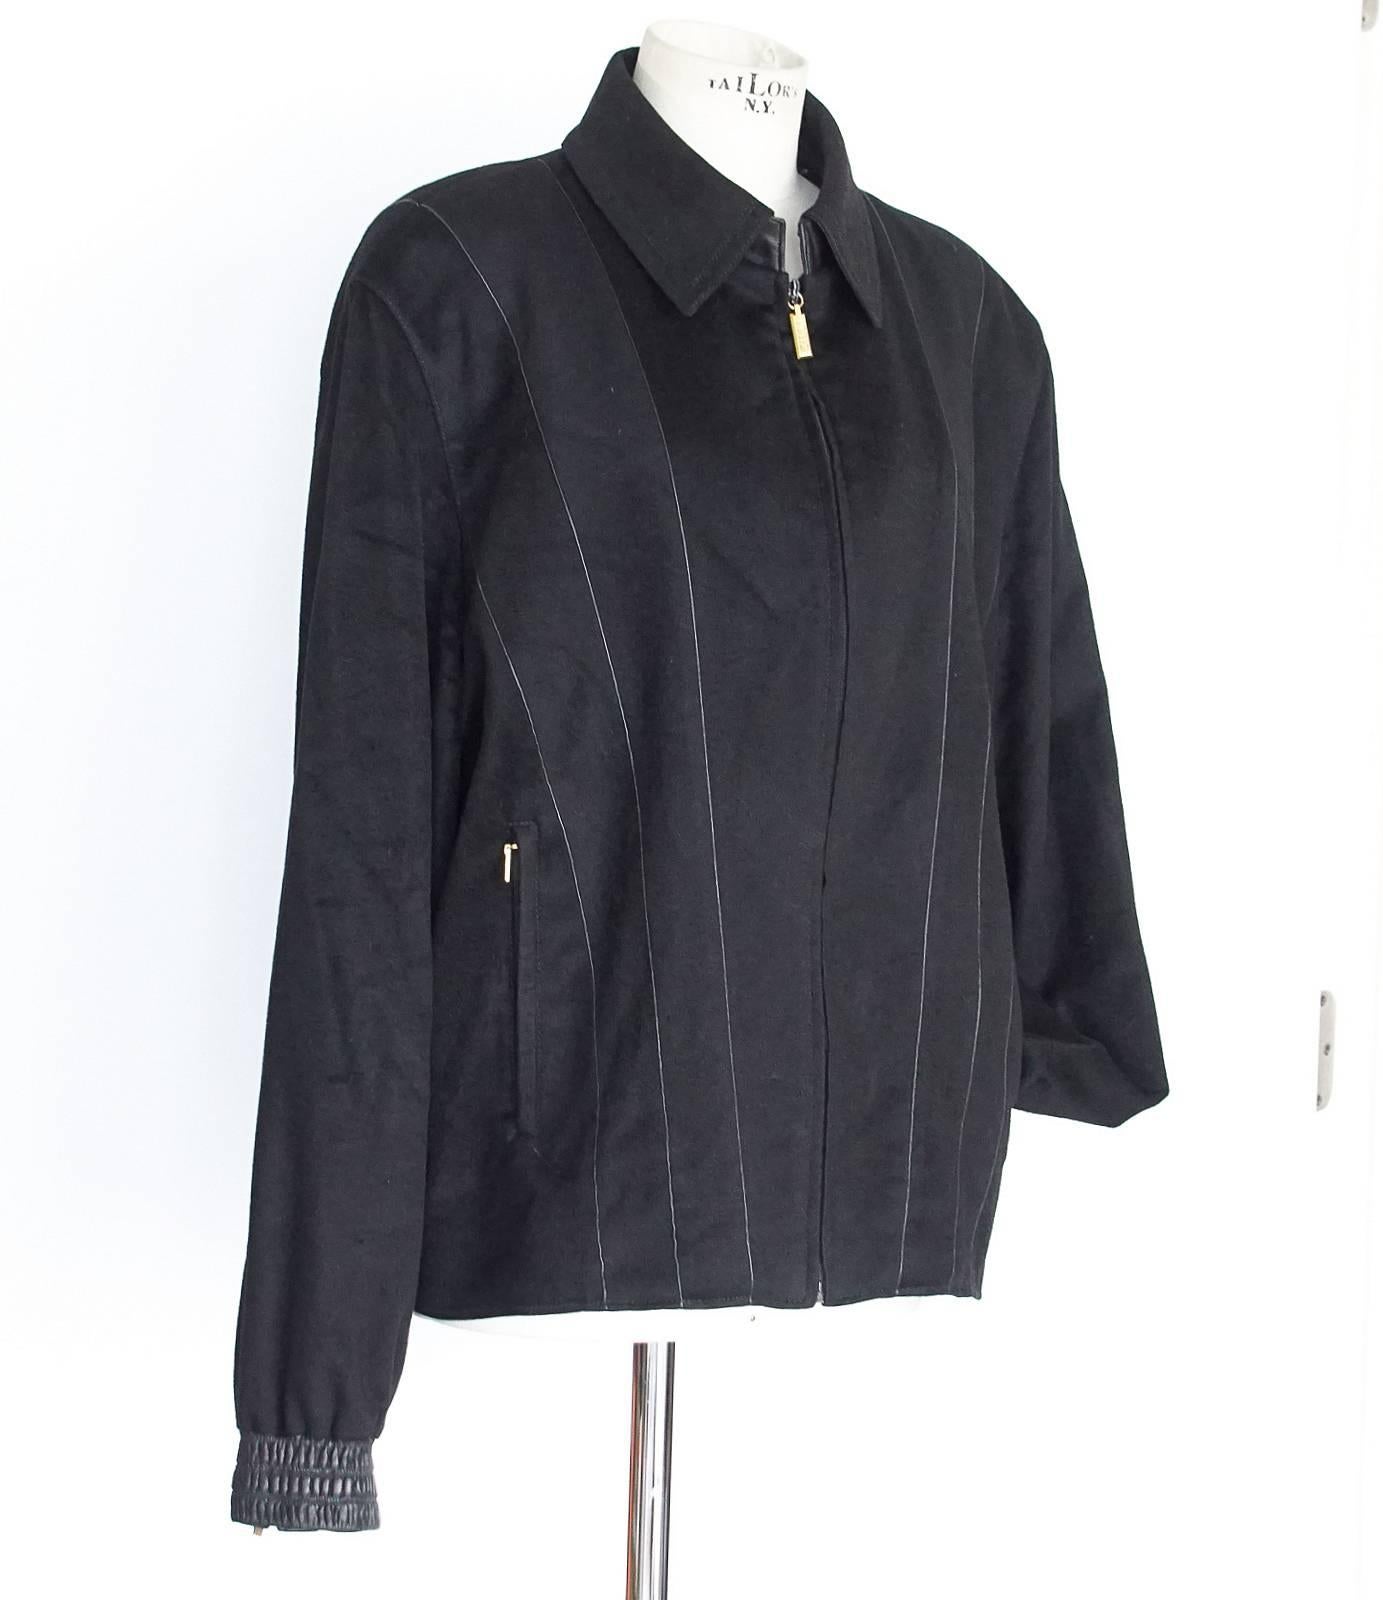 Guaranteed authentic Zilli men's black exquisite cashmere and leather accented bomber styled jacket created in 'panels' 
with very fine leather piping accentuating each one.  
Remarkable workmanship and fabric quality sets this label apart.
Collar